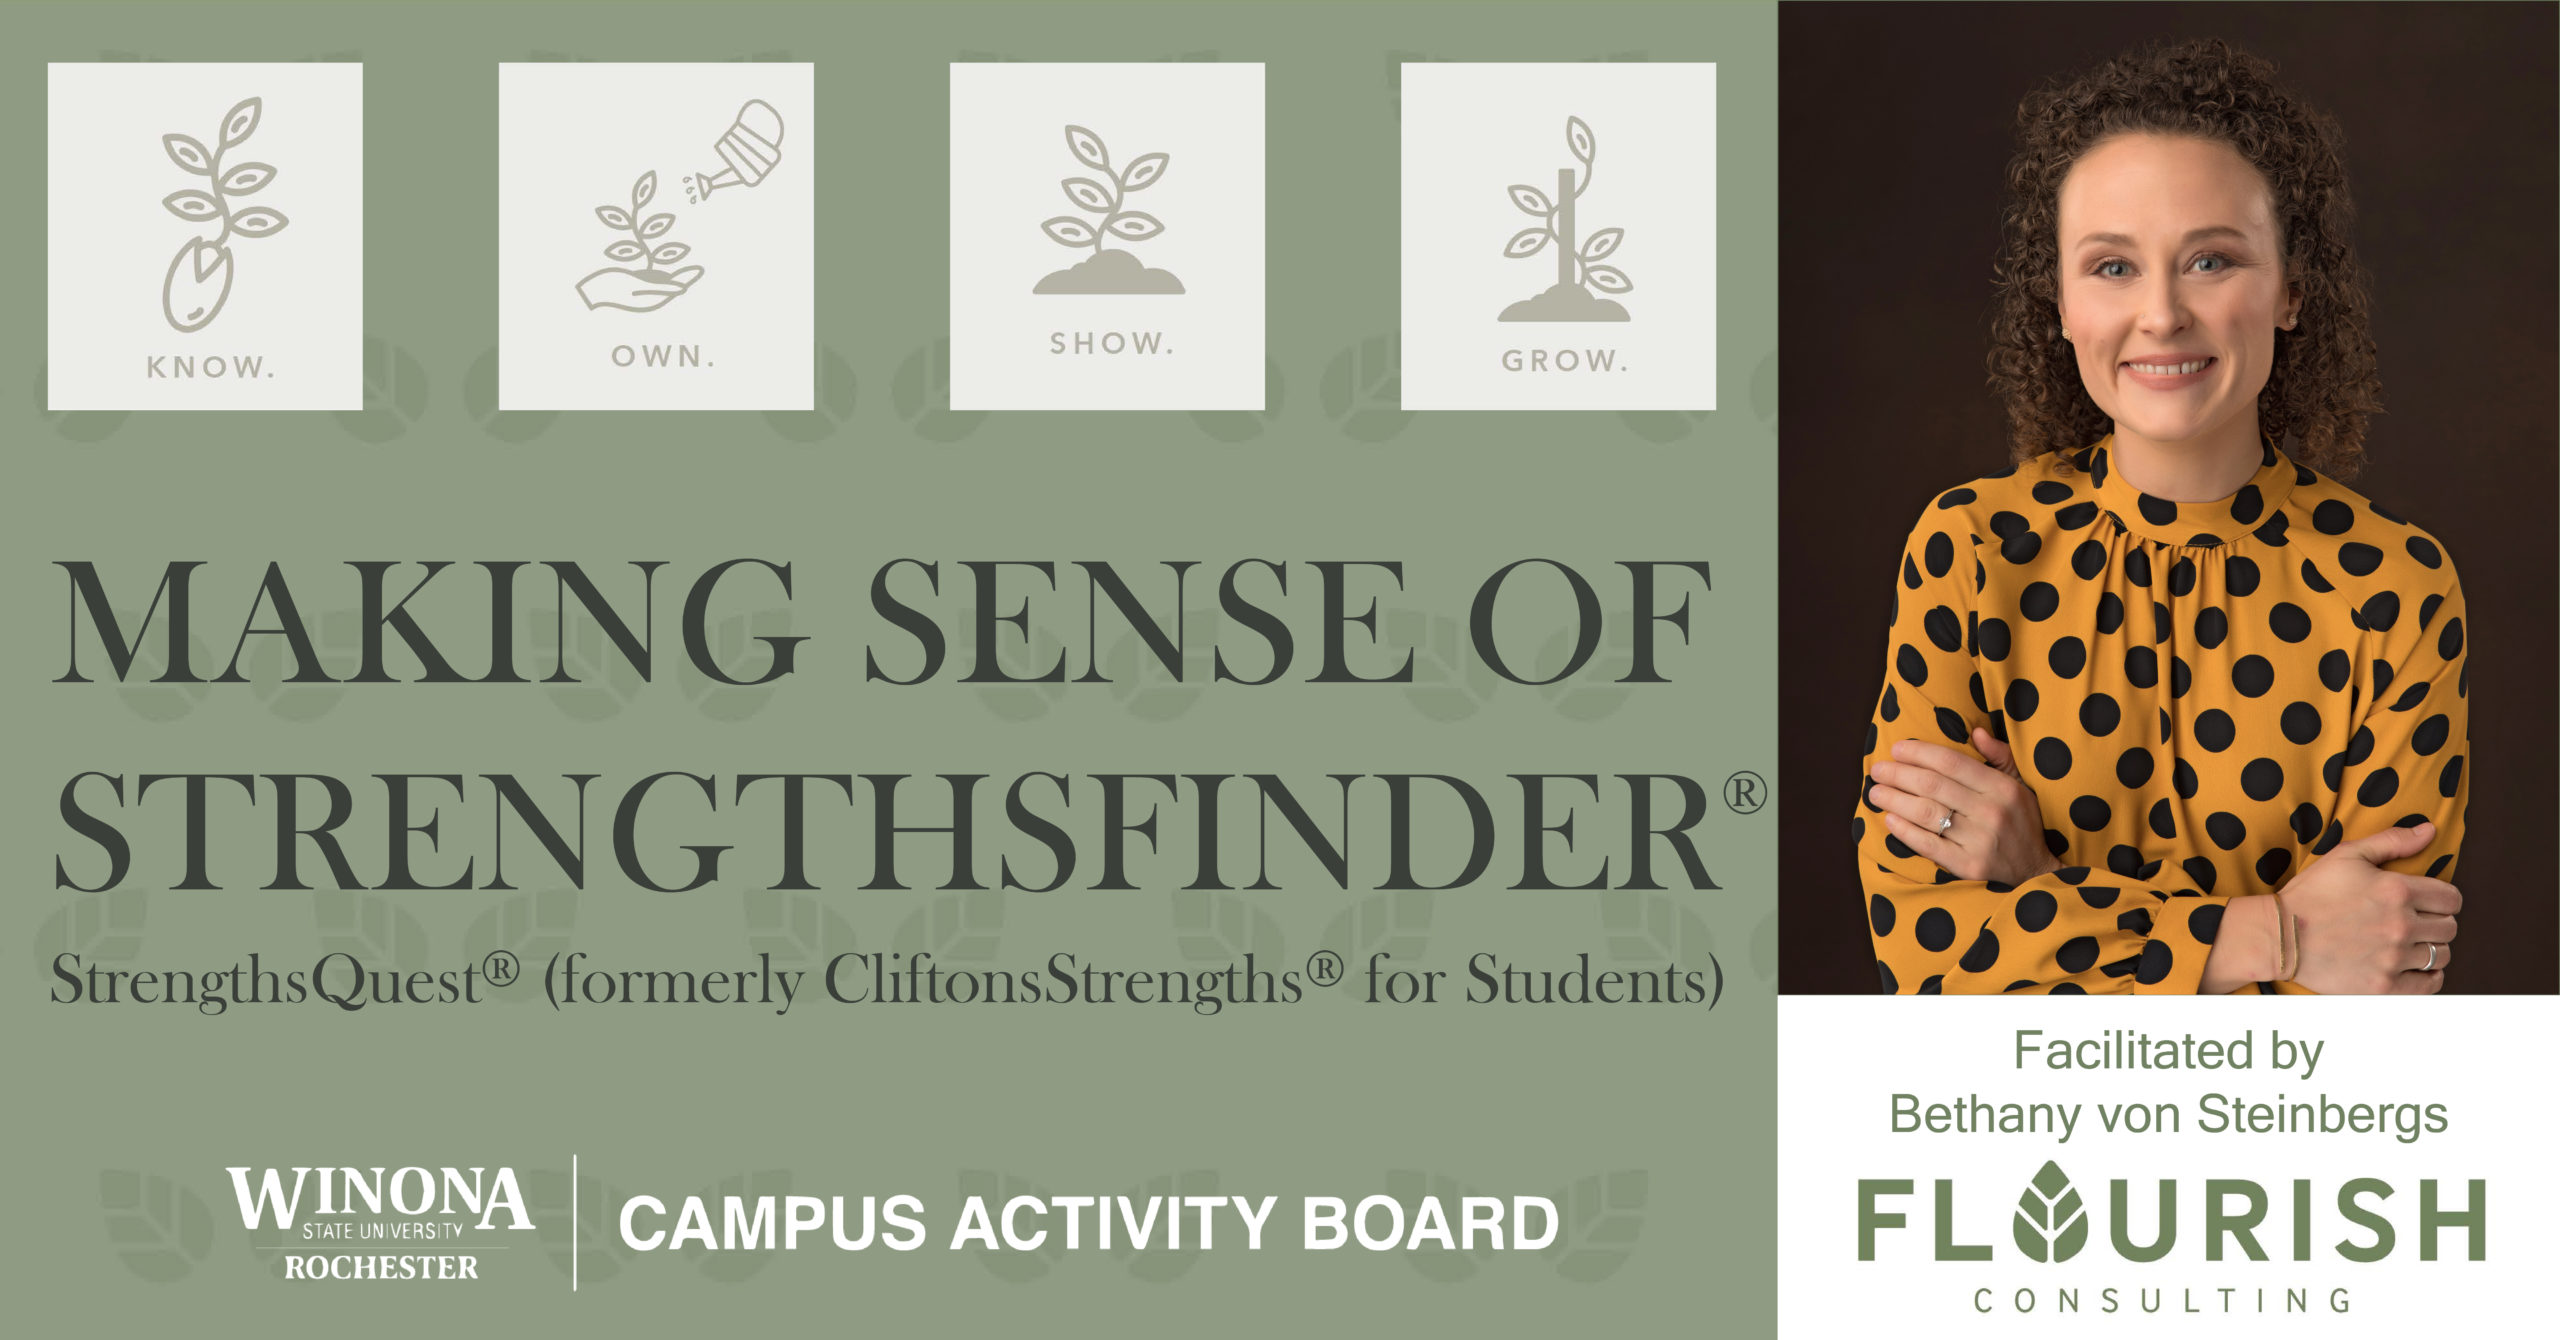 WSU-Rochester students are invited to a "Making Sense of StrengthsFinder" Workshop.